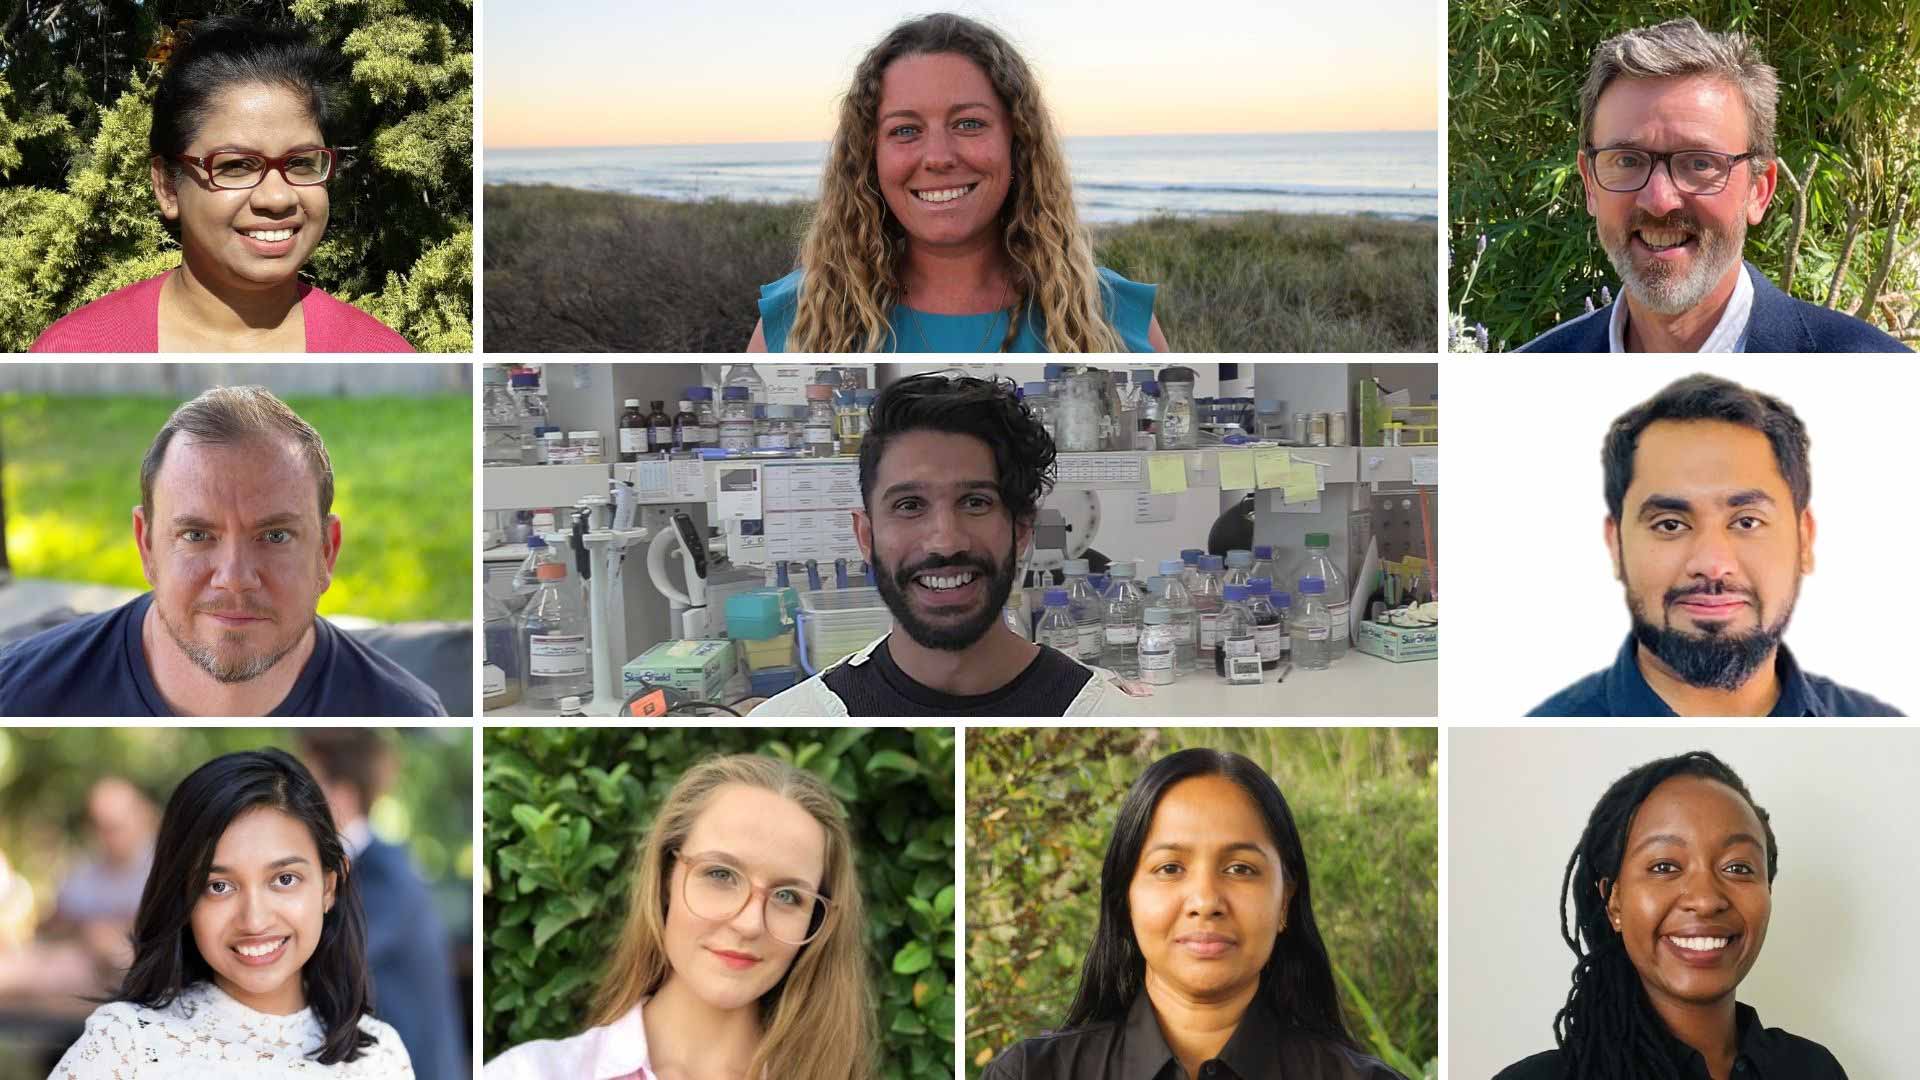 The 10 UOW PhD candidates selected as 2021 UOW Three Minute Thesis finalists